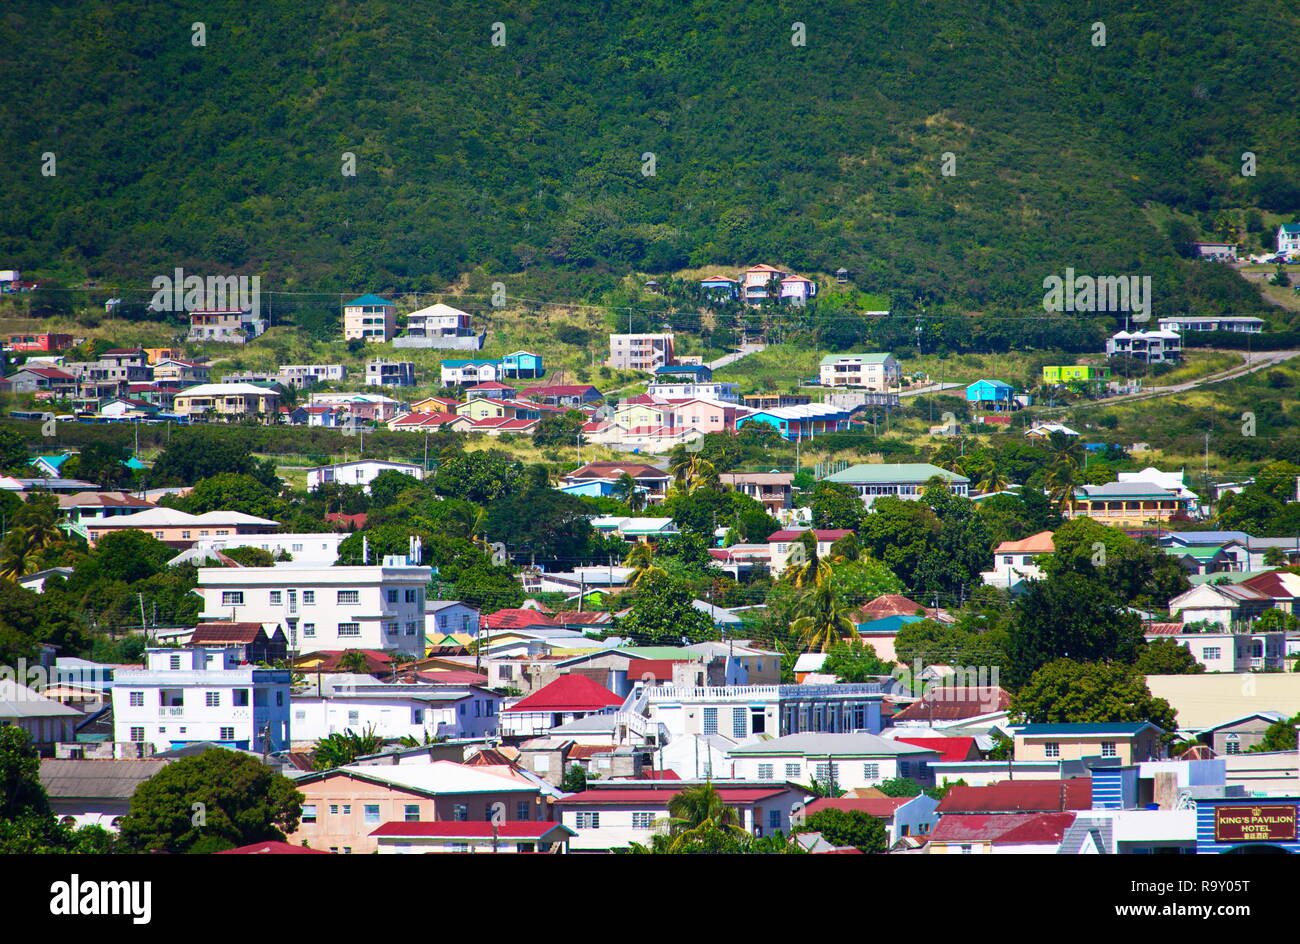 Colorful Rooftops in St Kitts Under Green Hills and Clouds Stock Photo